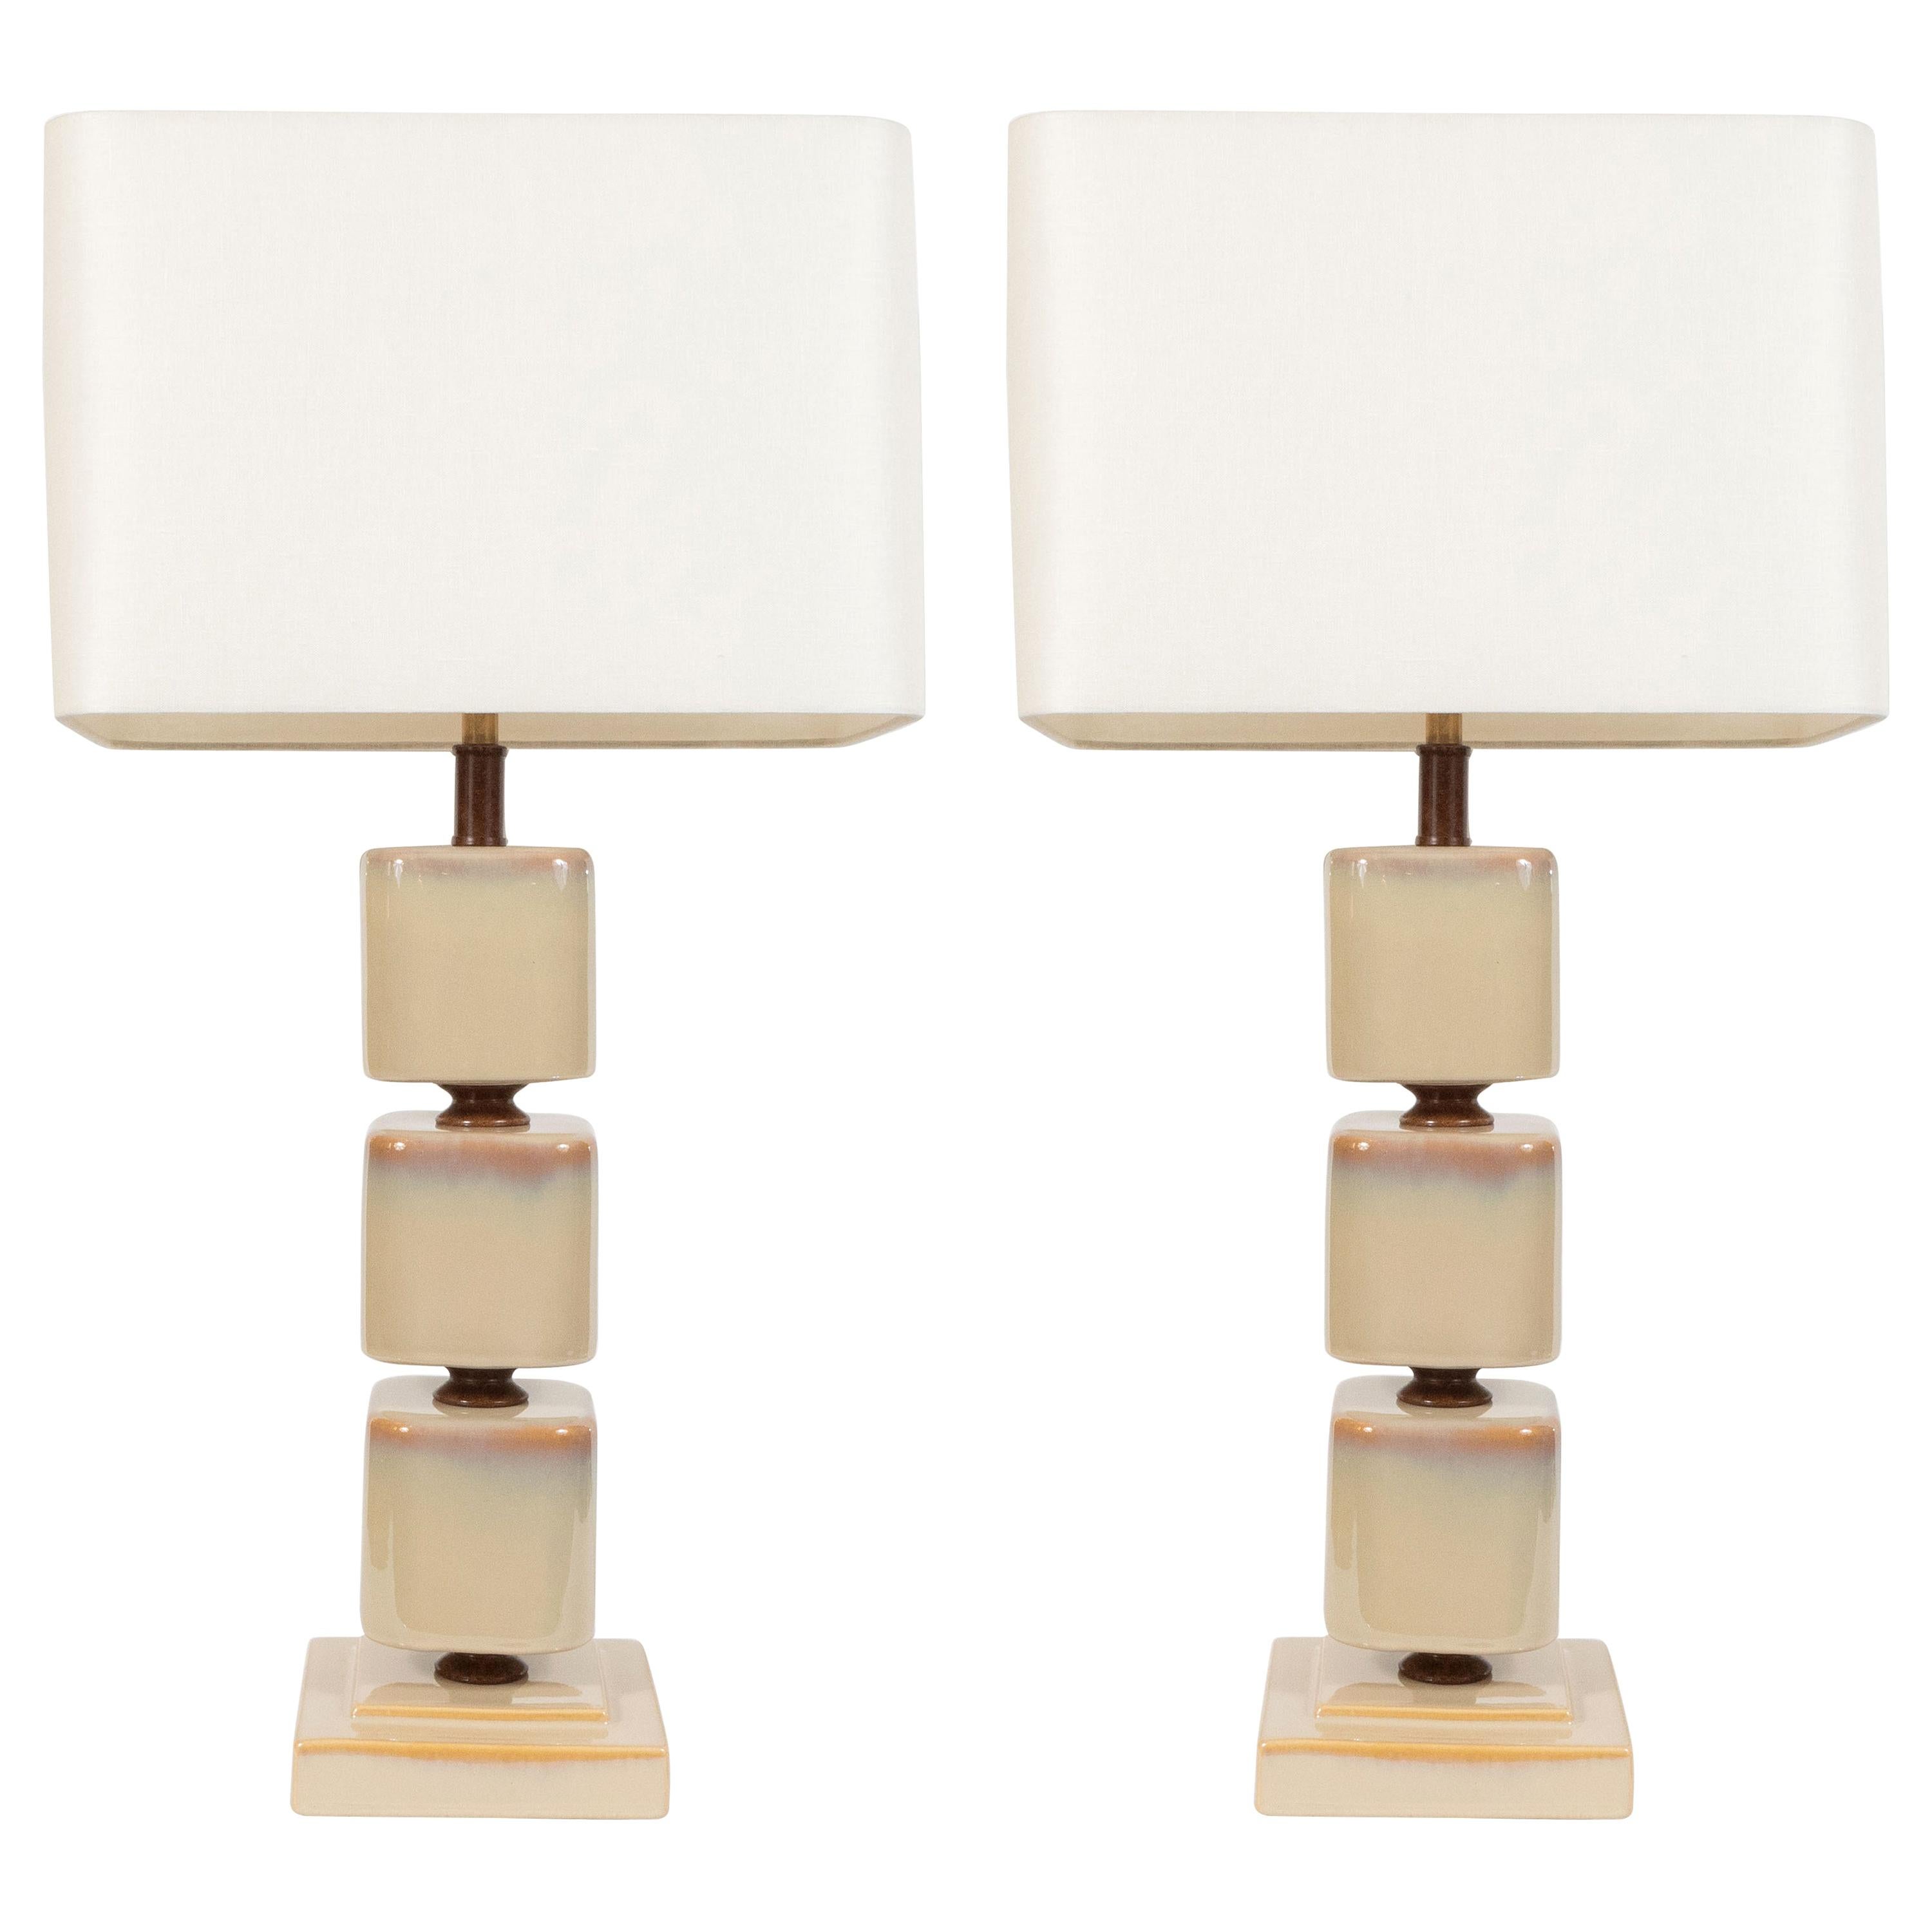 Pair of Mid-Century Modern Ceramic Pearlescent Cube Table Lamps